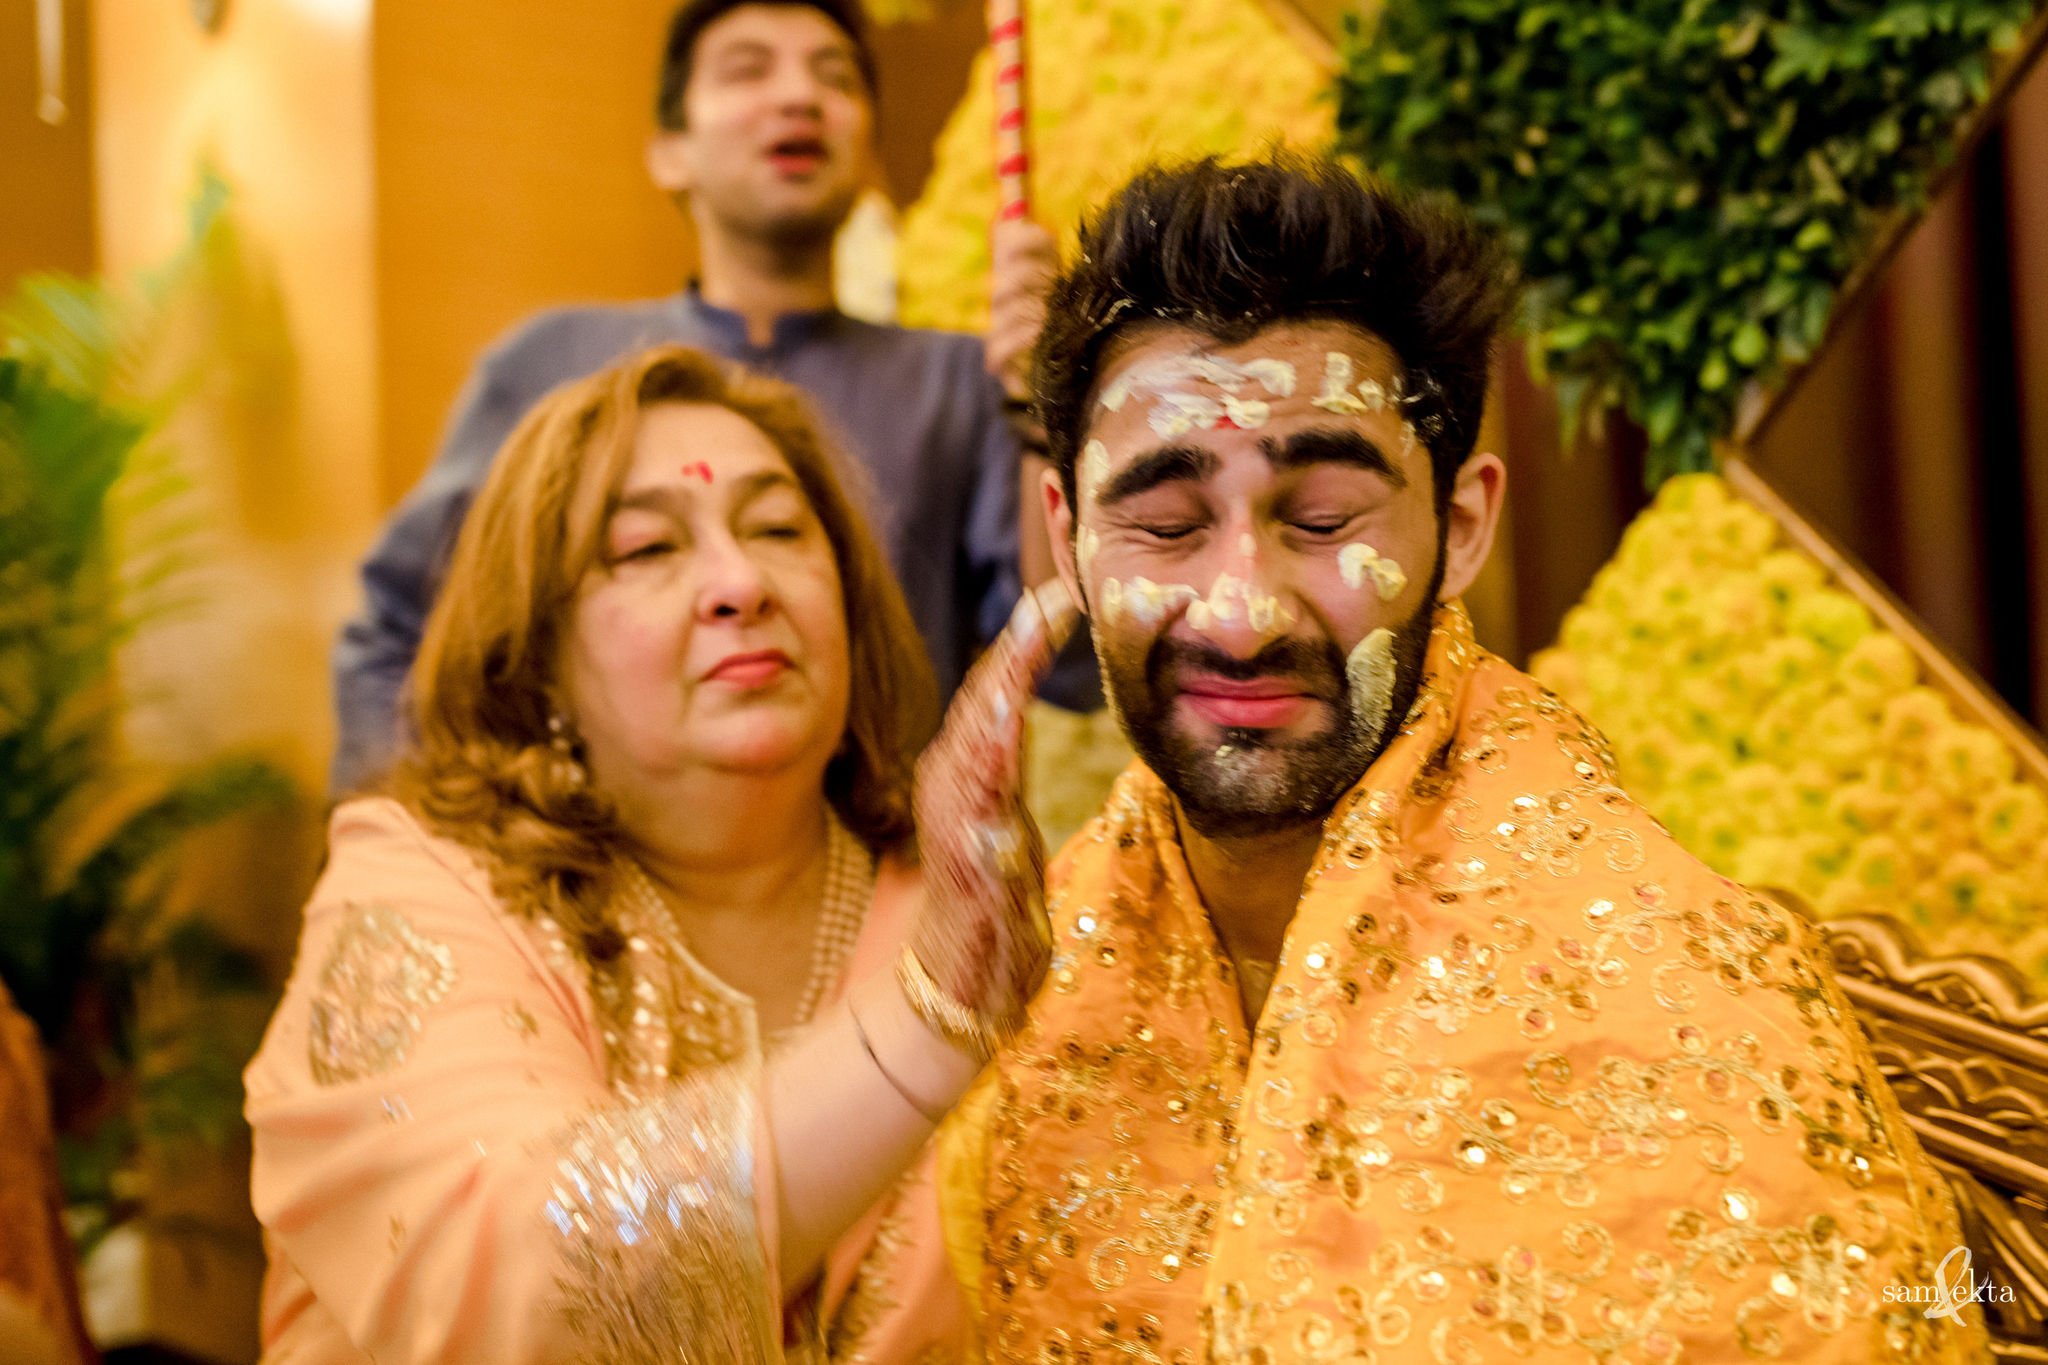 ...can breach your rule of 'no messy haldi' and you can't do anything about it